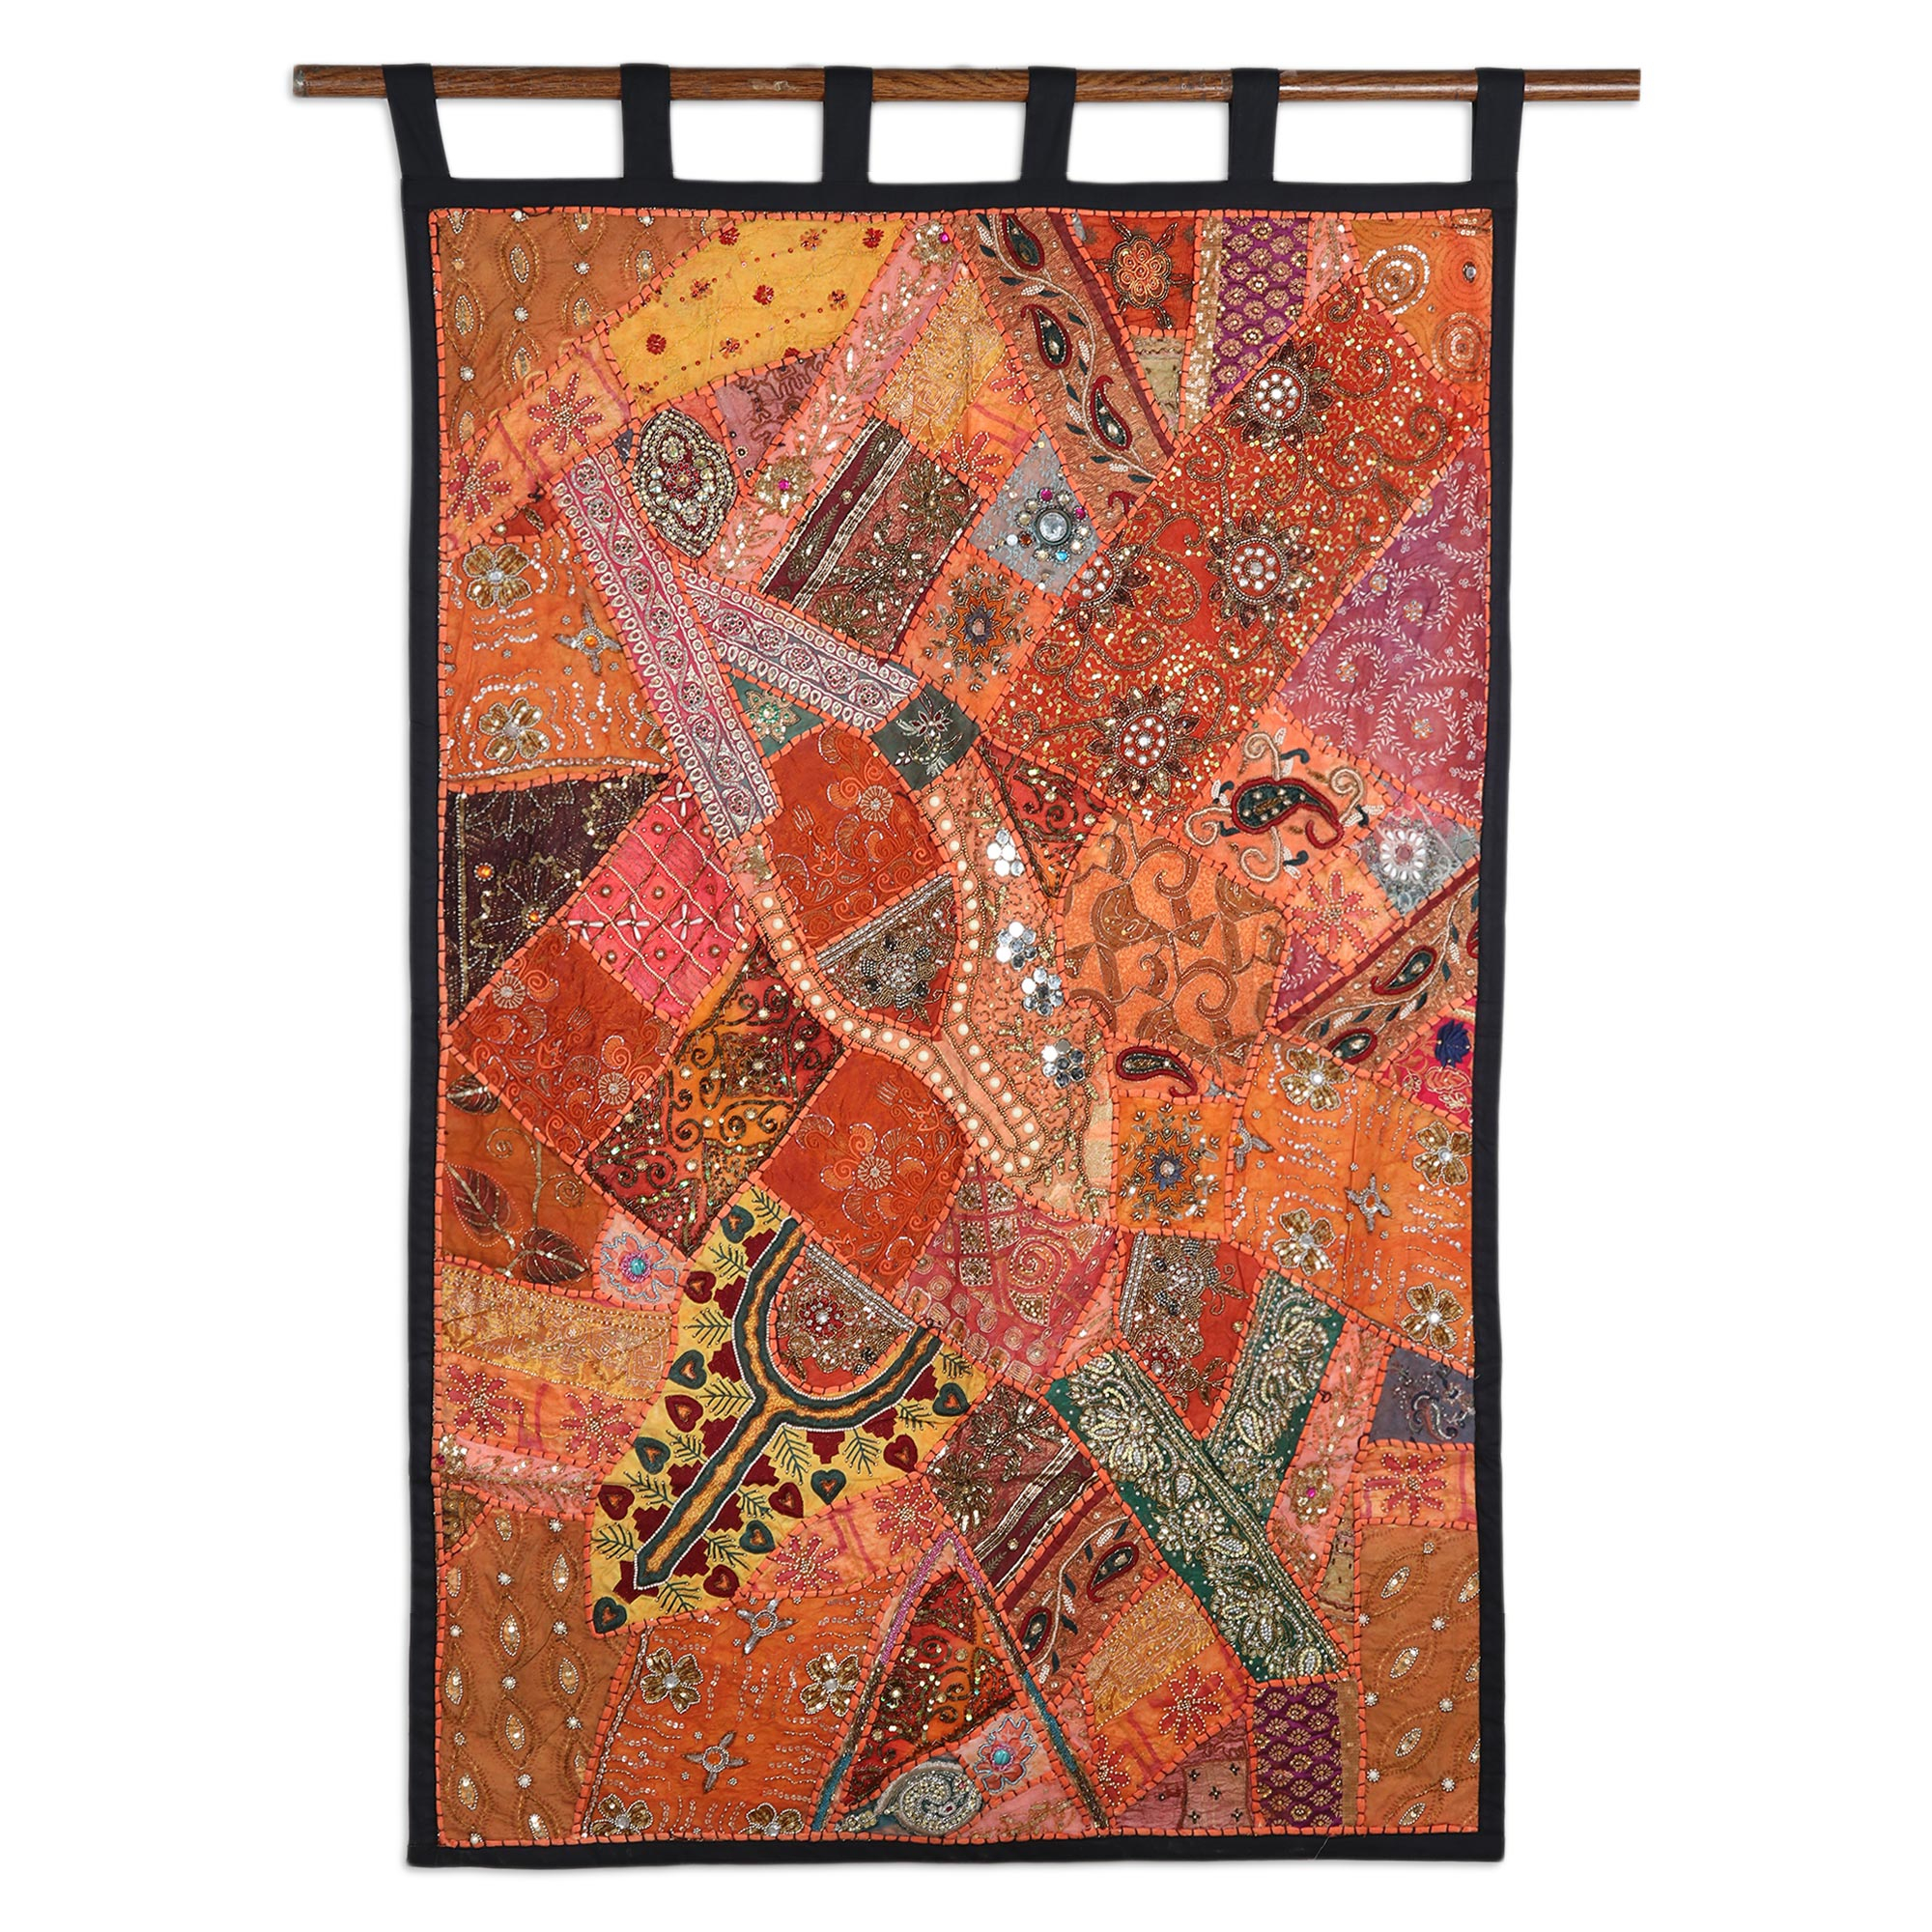 Embroidered Wall Hanging Sequins and Beads Embroidery Abstract